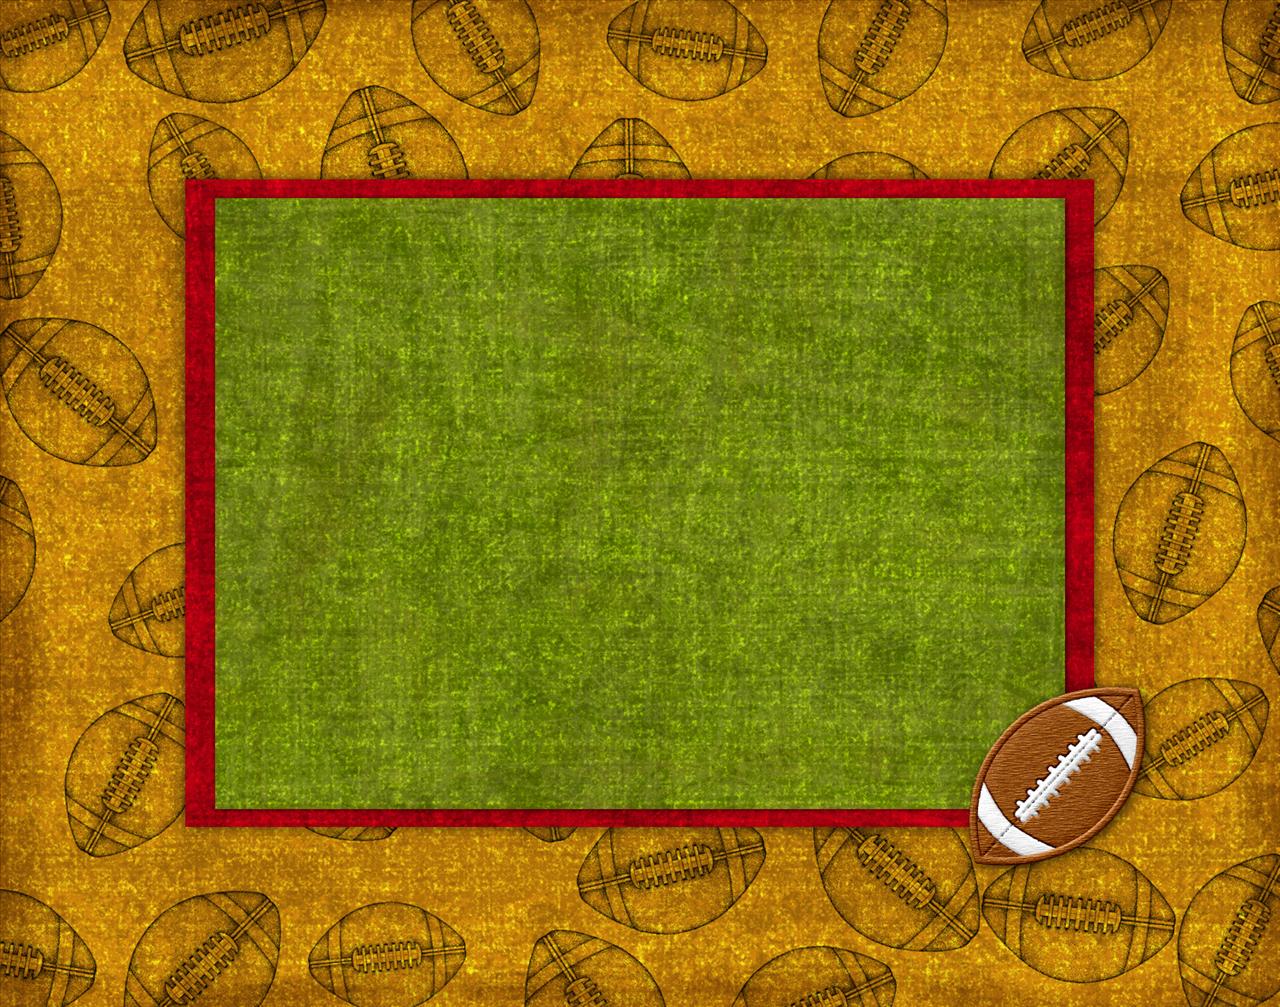 Football Cover Page - Grungy Athlete Backgrounds powerpoint backgrounds